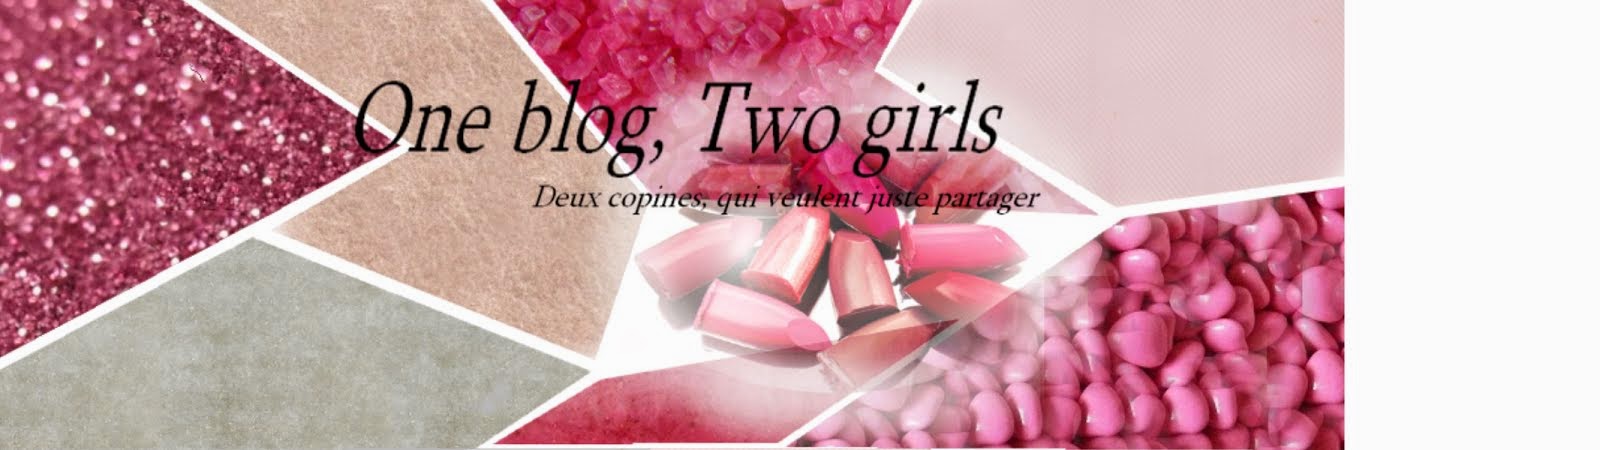 One blog, Two girls